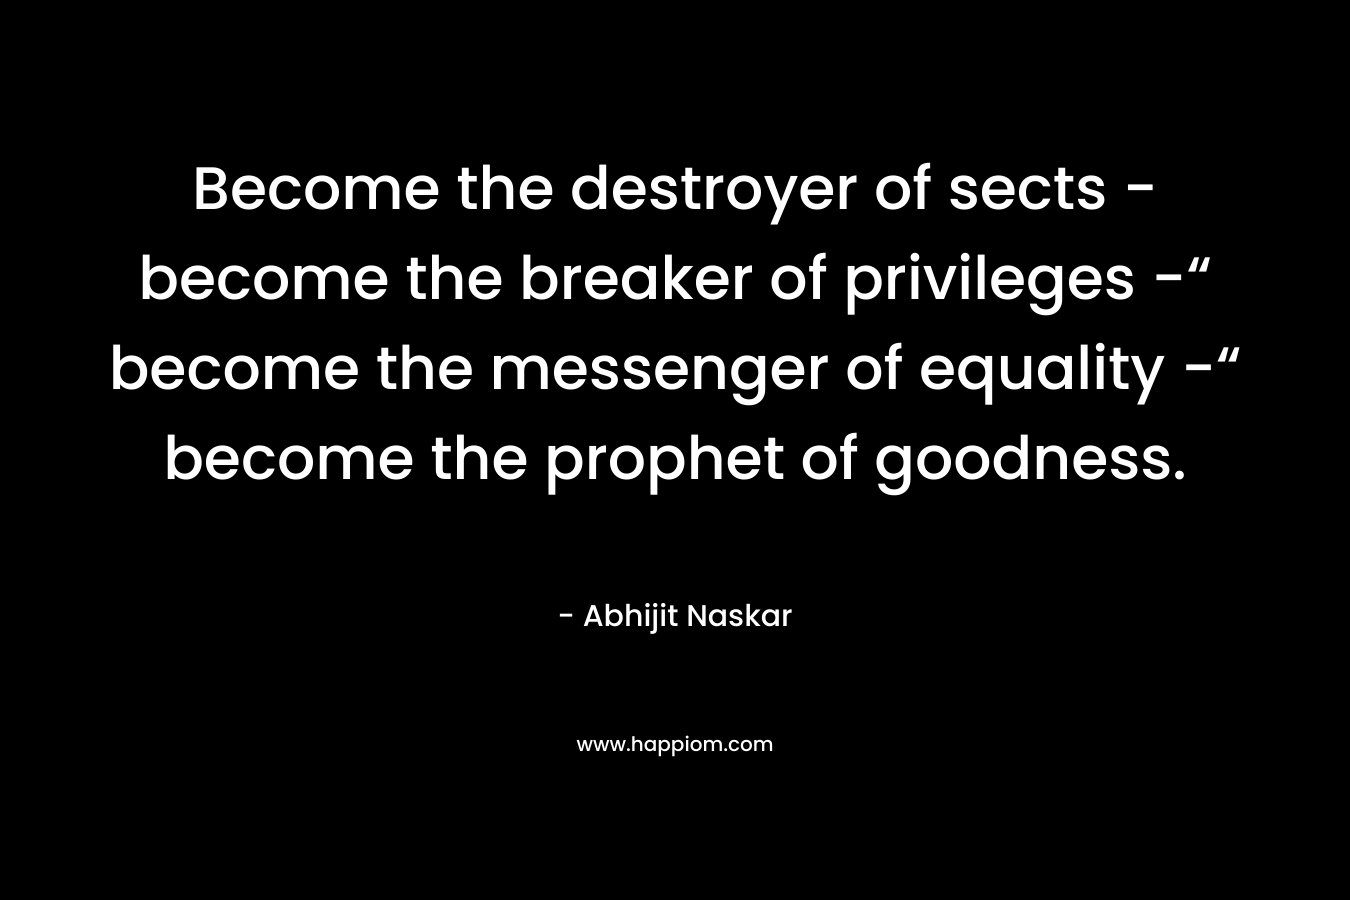 Become the destroyer of sects - become the breaker of privileges -“ become the messenger of equality -“ become the prophet of goodness.